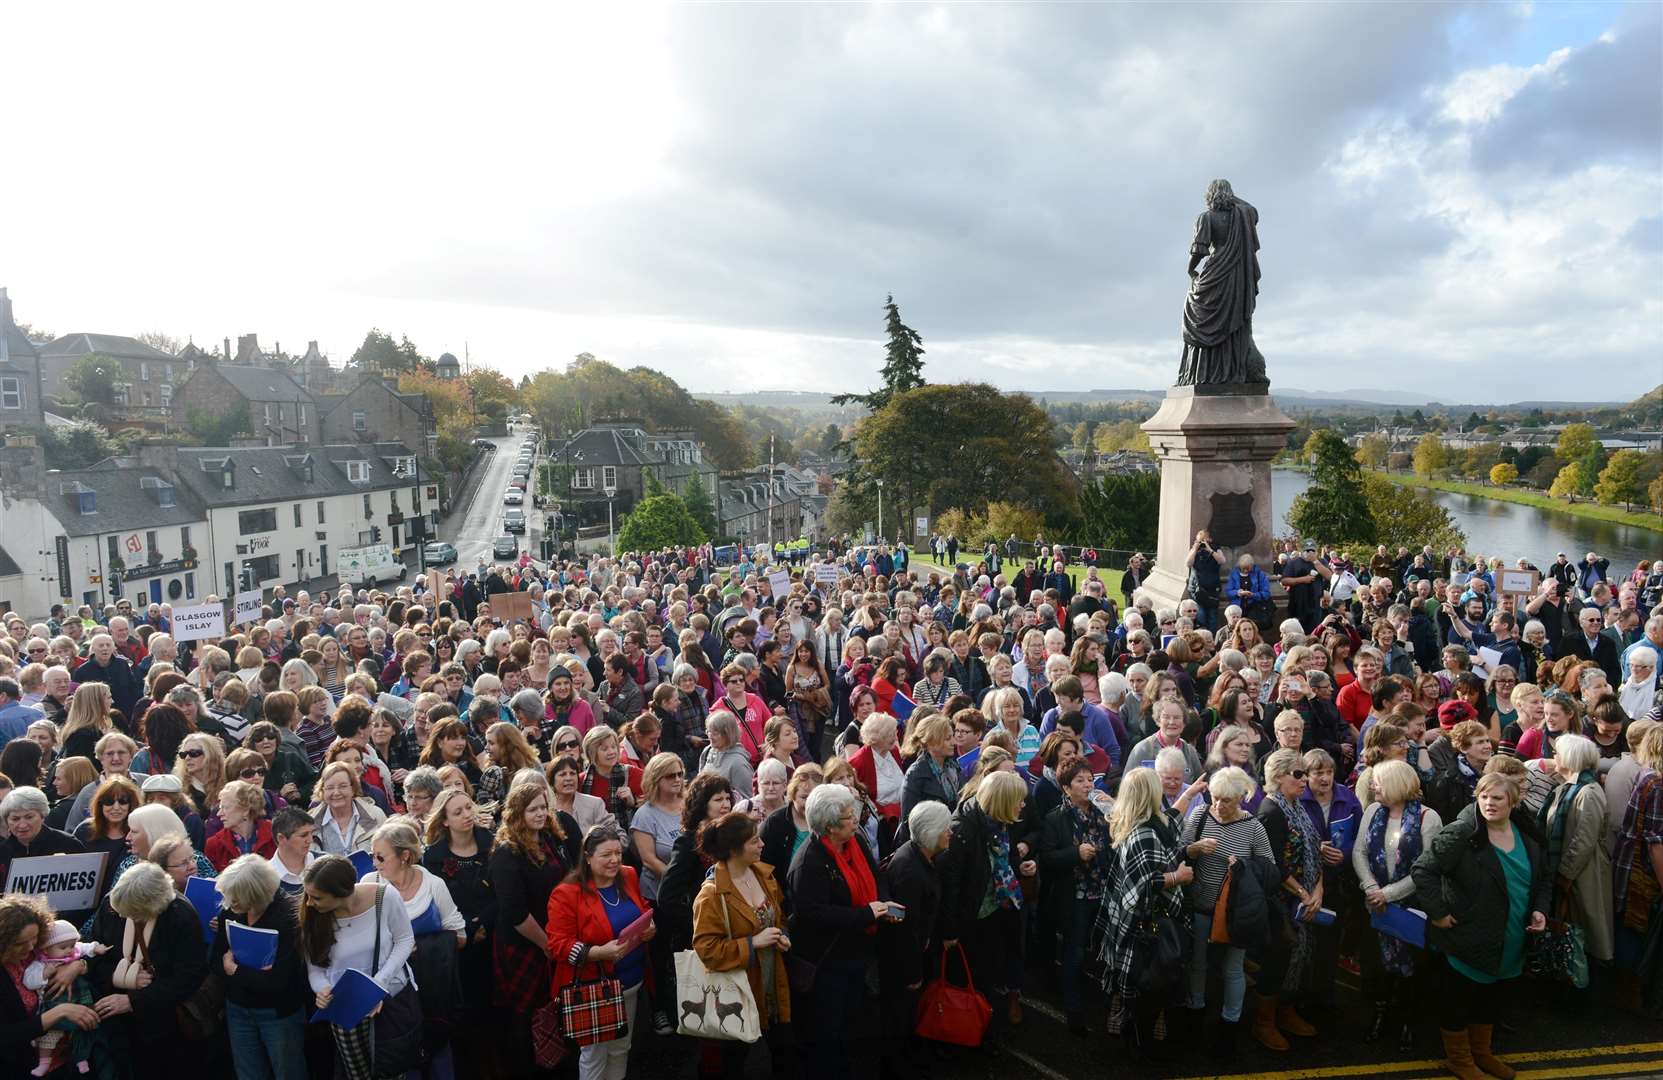 The crowds in front of Inverness Castle..The massed choirs of the Royal National Mod 2014 provided a wonderful finale to the renowned Gaelic music event...Picture: Alison White. Image No.027174.